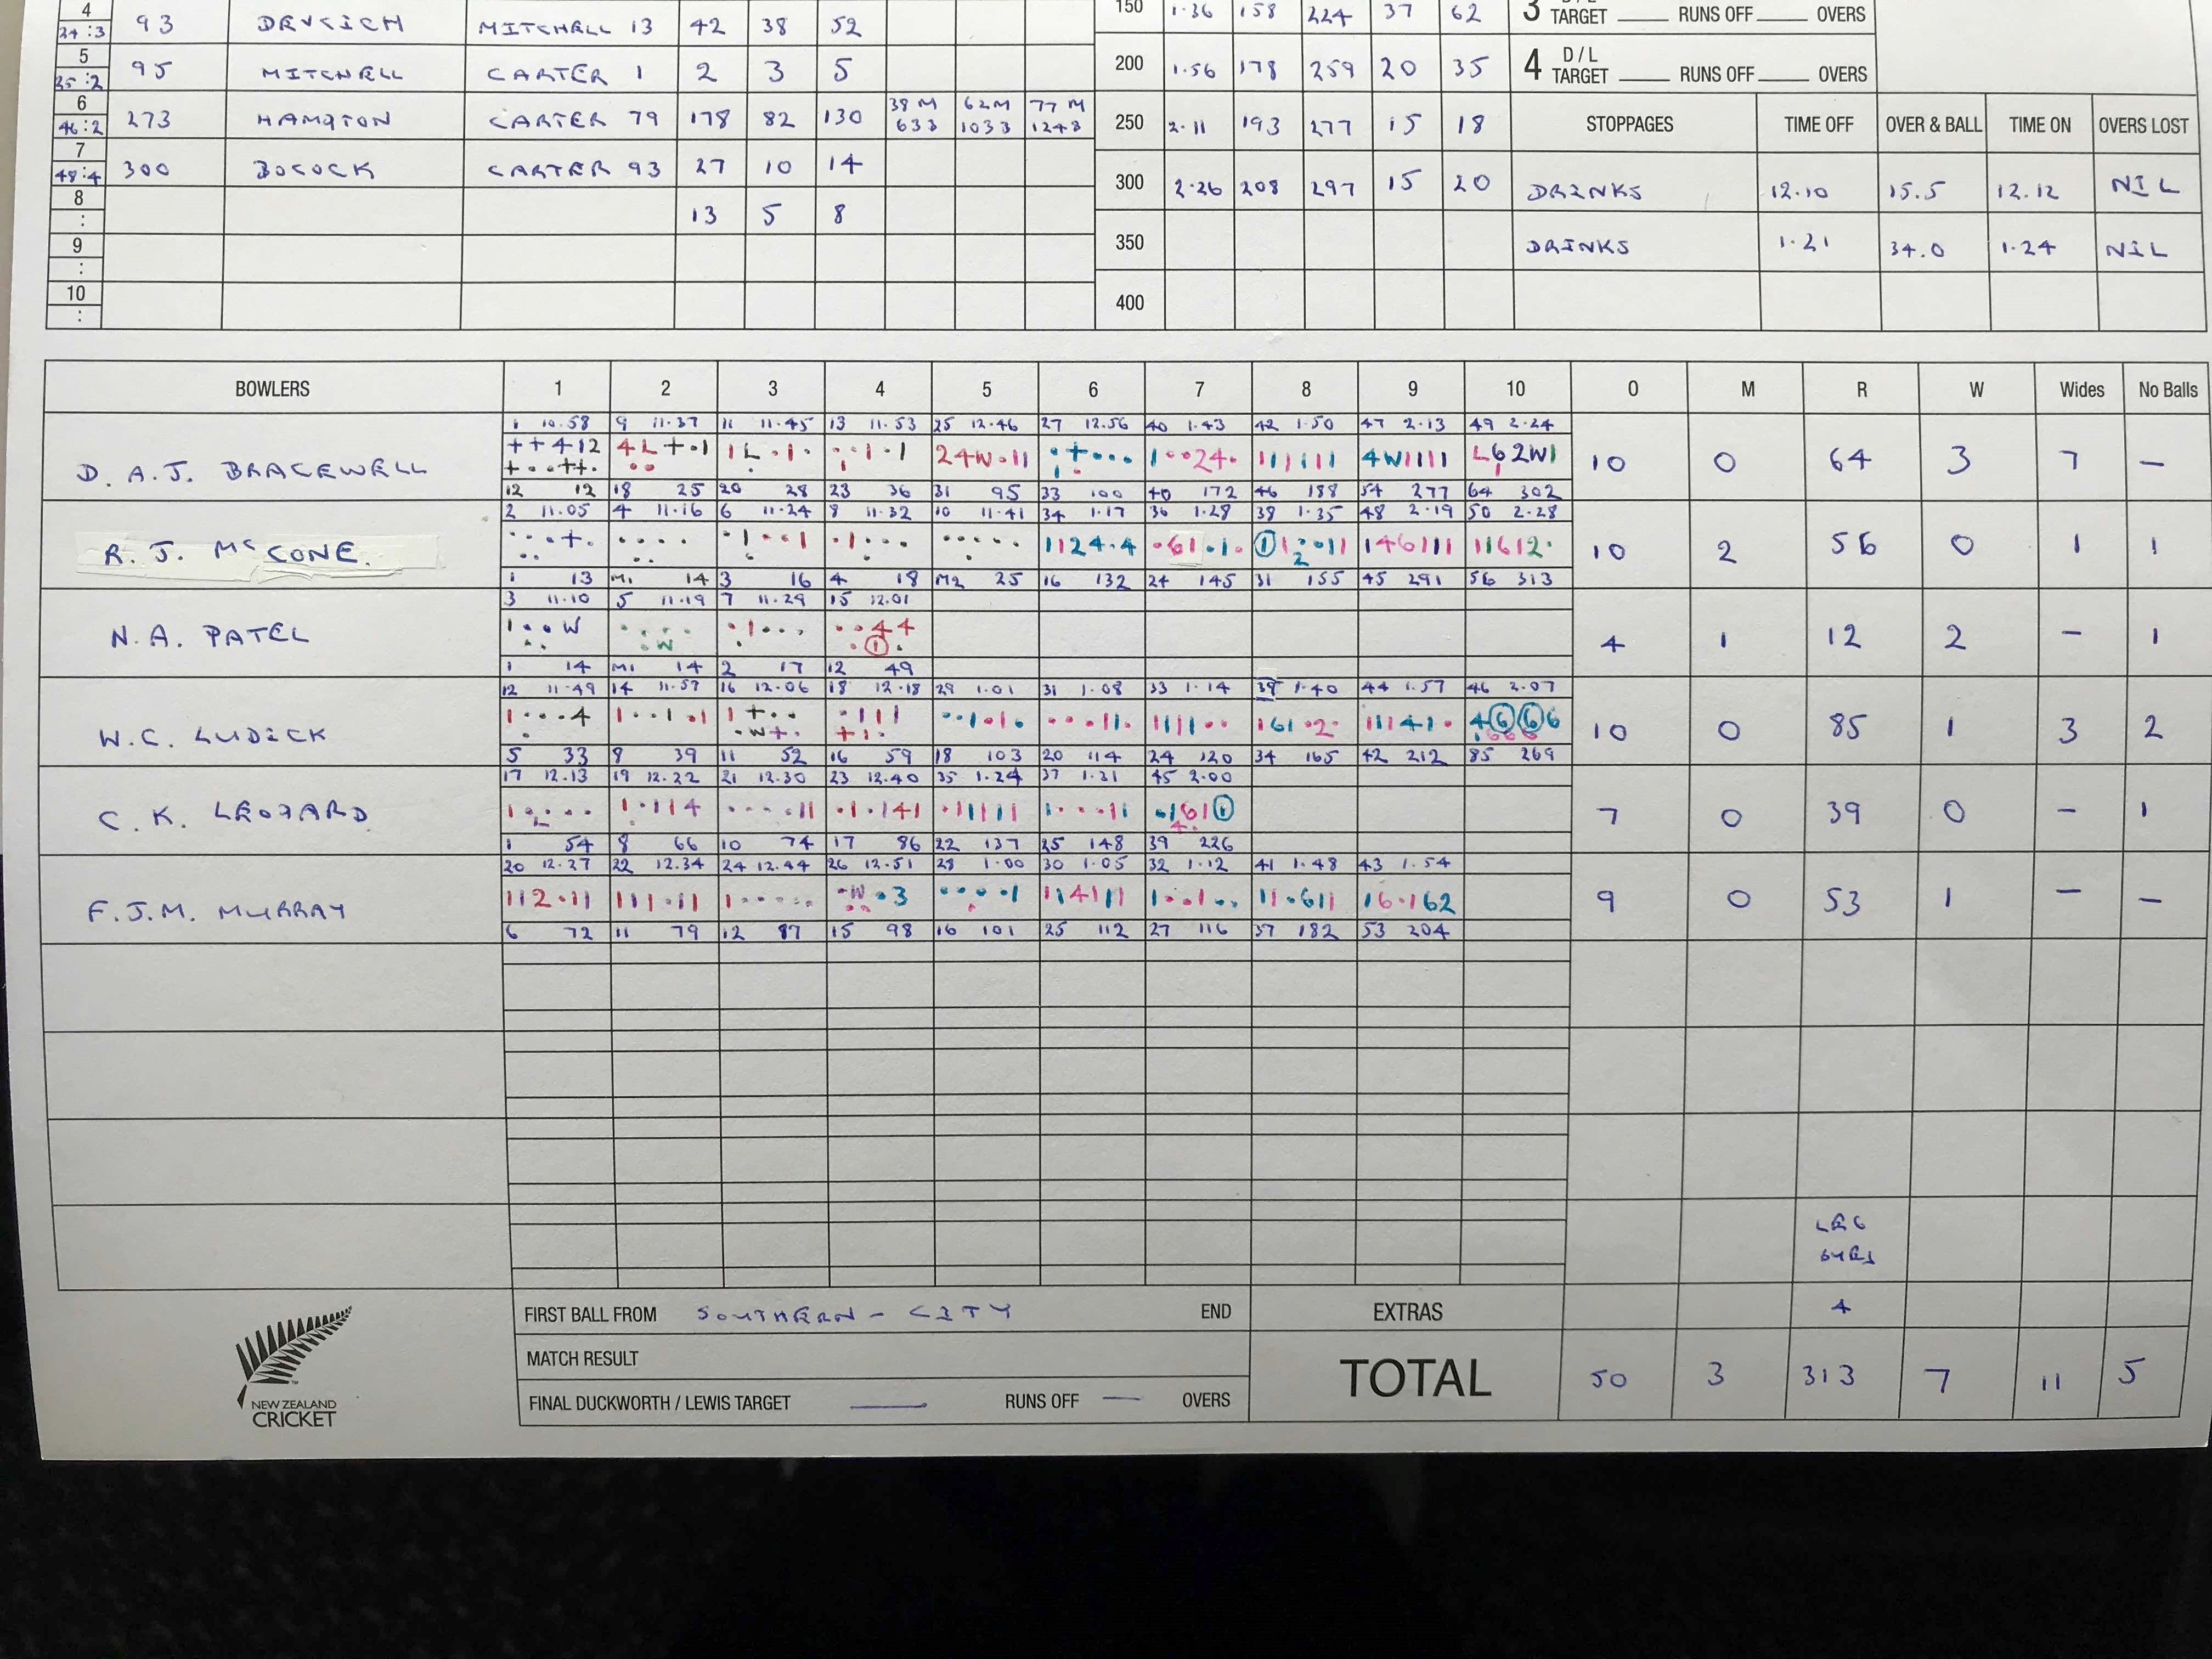 The scorecard showing the world record over